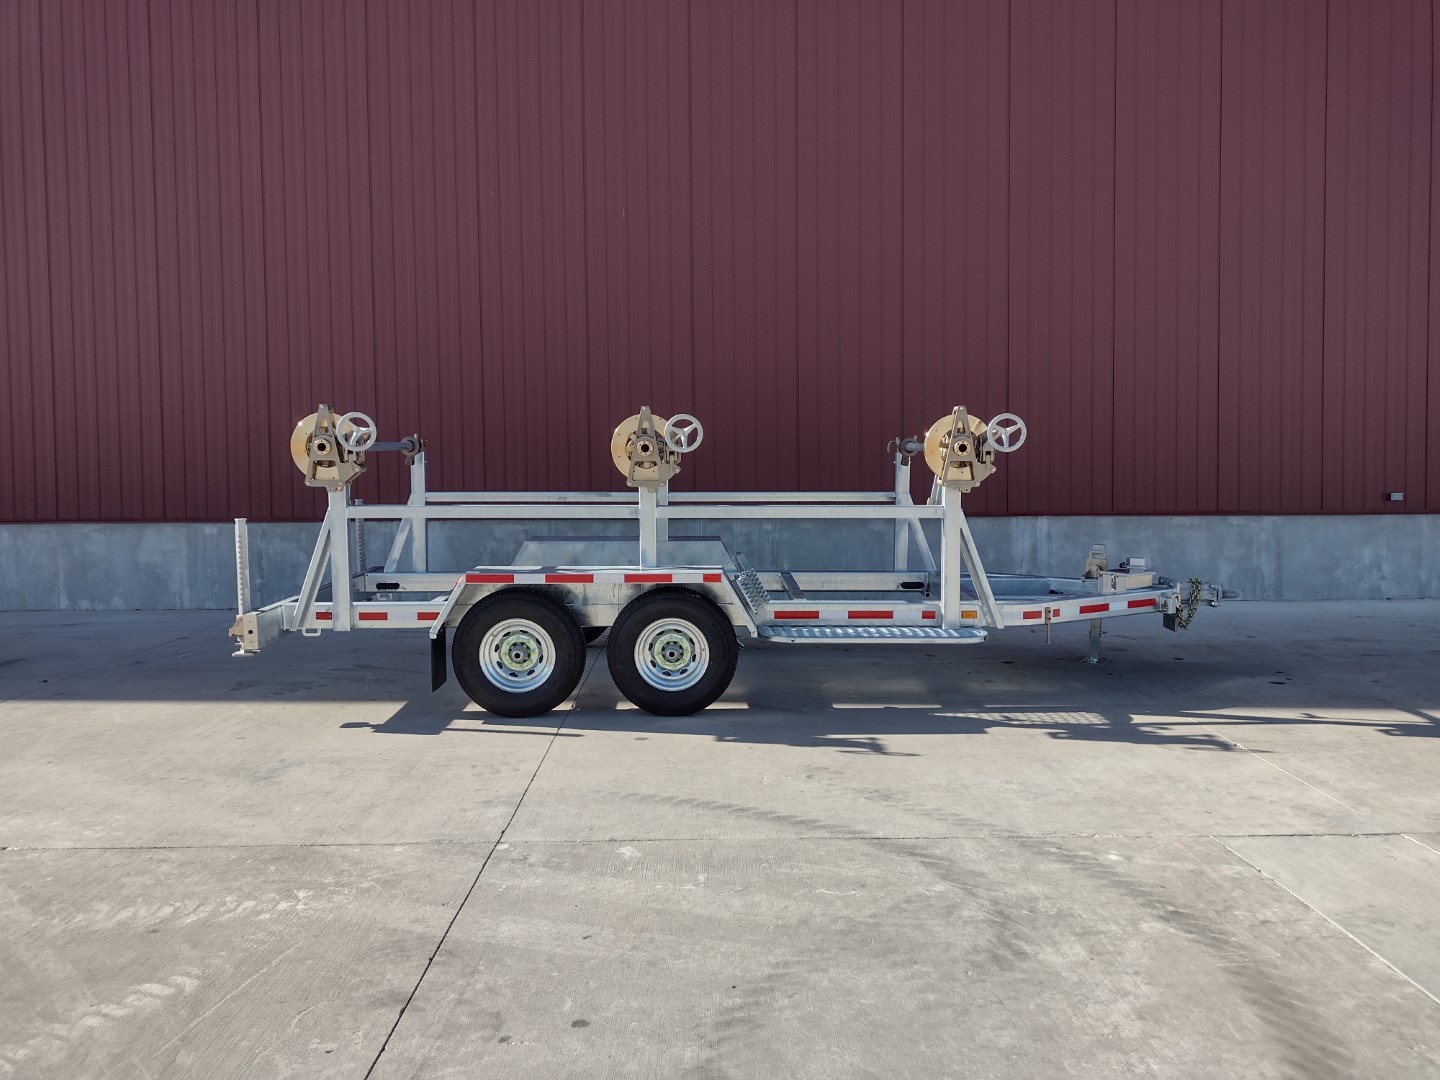 Right side view of Model 1530 Three Reel Trailer with Model 1602 All Bronze Tensioning Brakes shown in front of a red metal building on concrete.